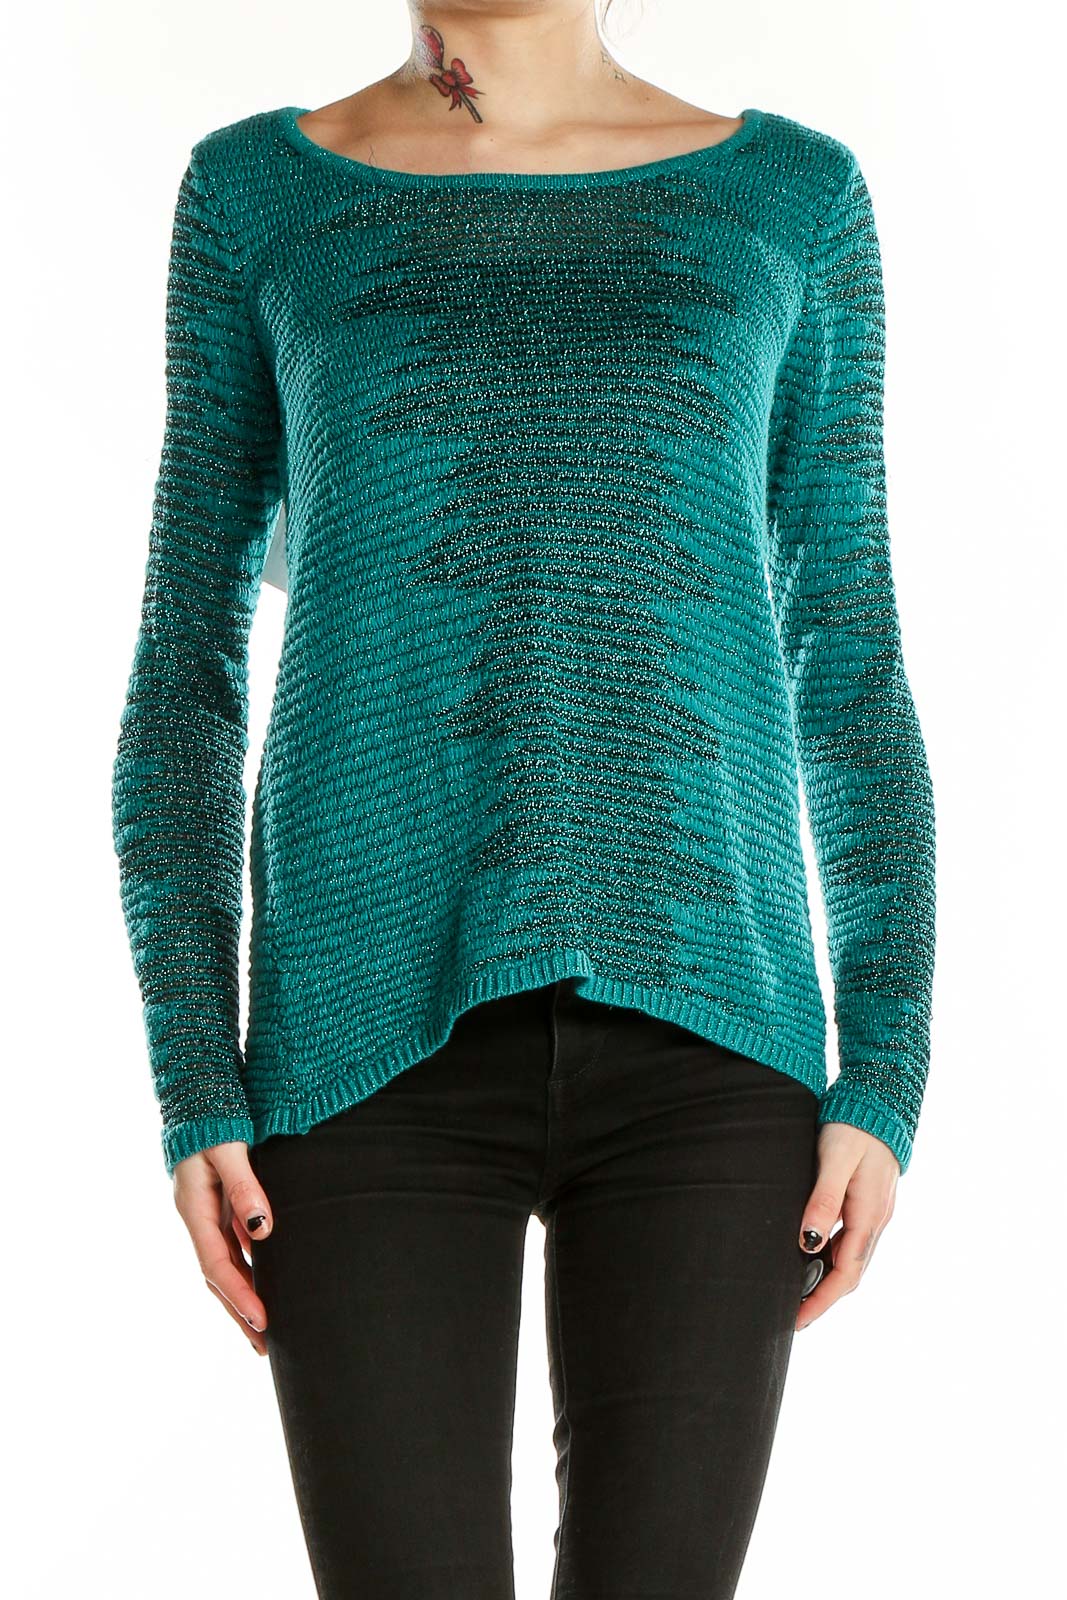 Green Shimmer Texture Sweater Front